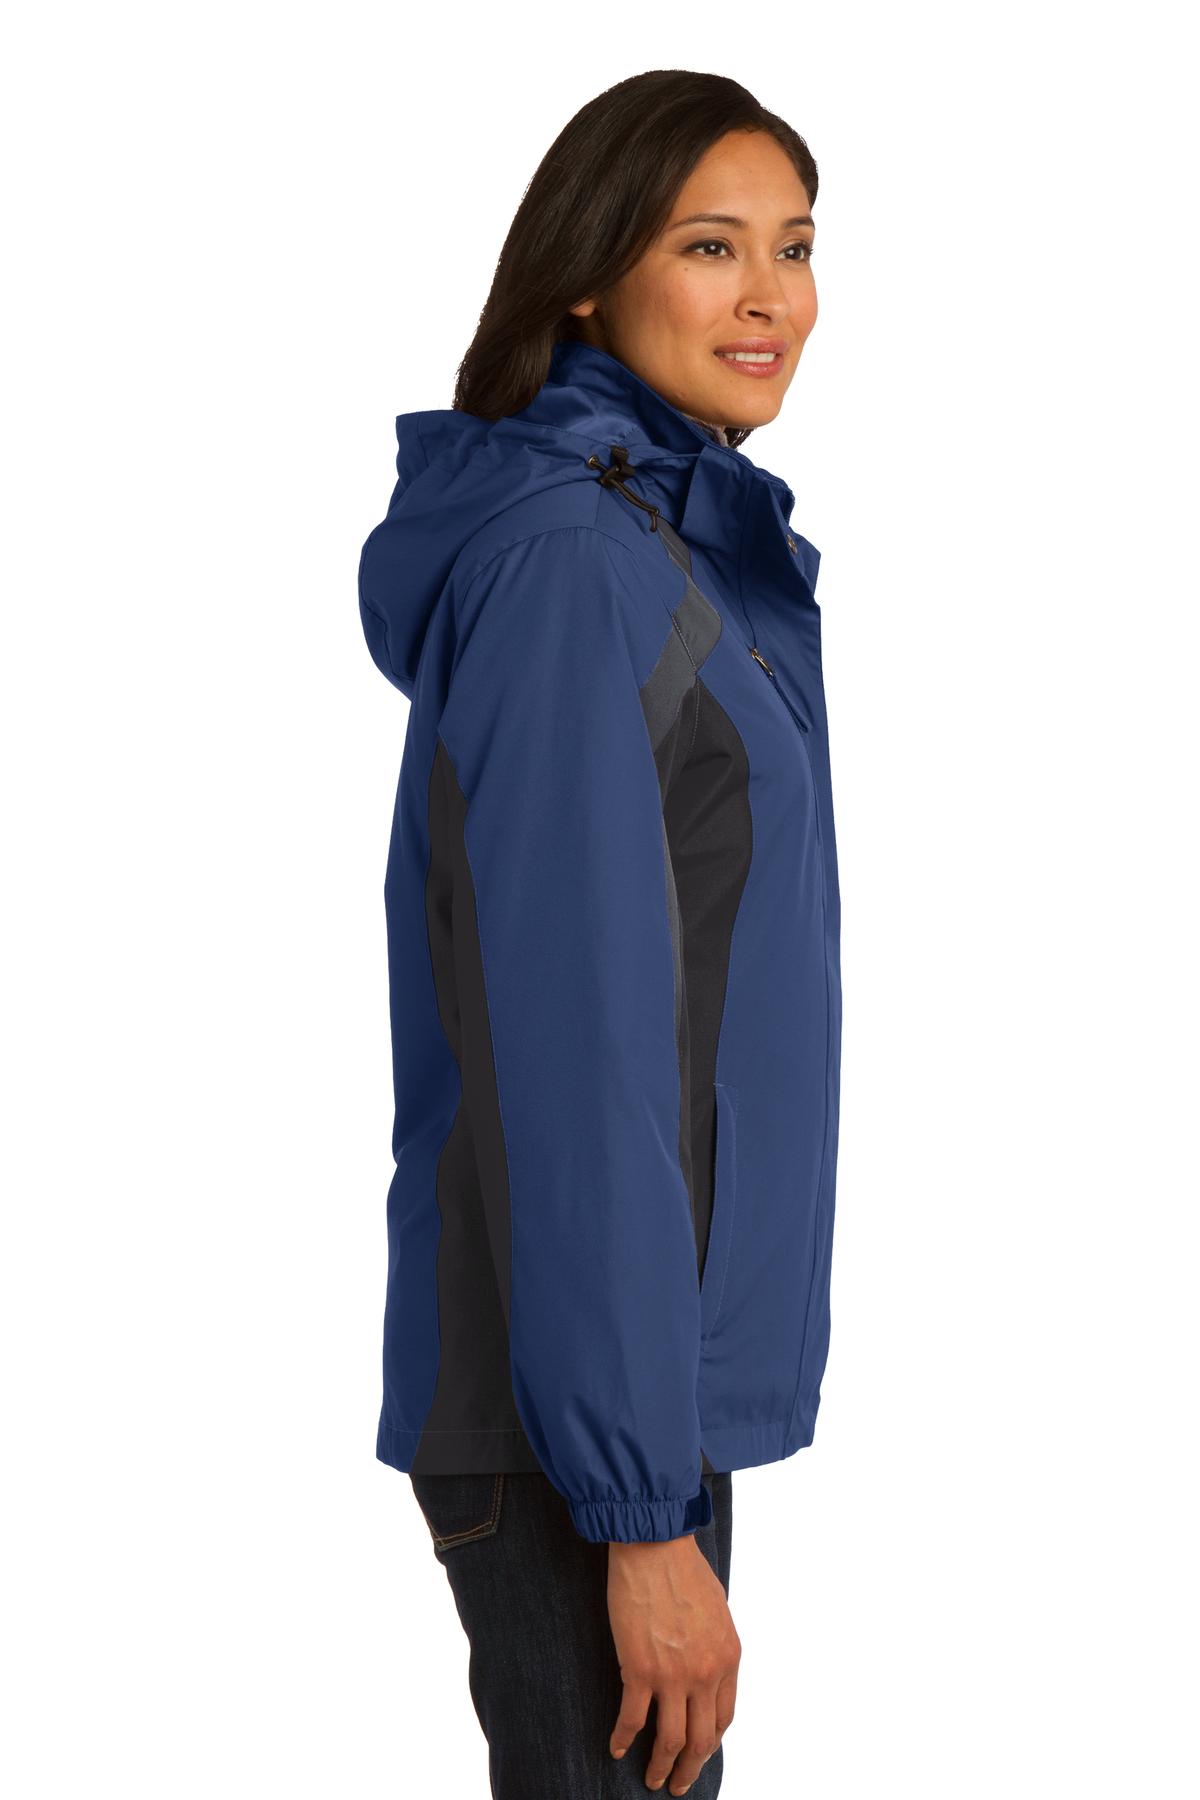 Port Authority Ladies Colorblock 3 in 1 Jacket-S (Admiral Blue/ Black/ Magnet Grey) - image 3 of 5